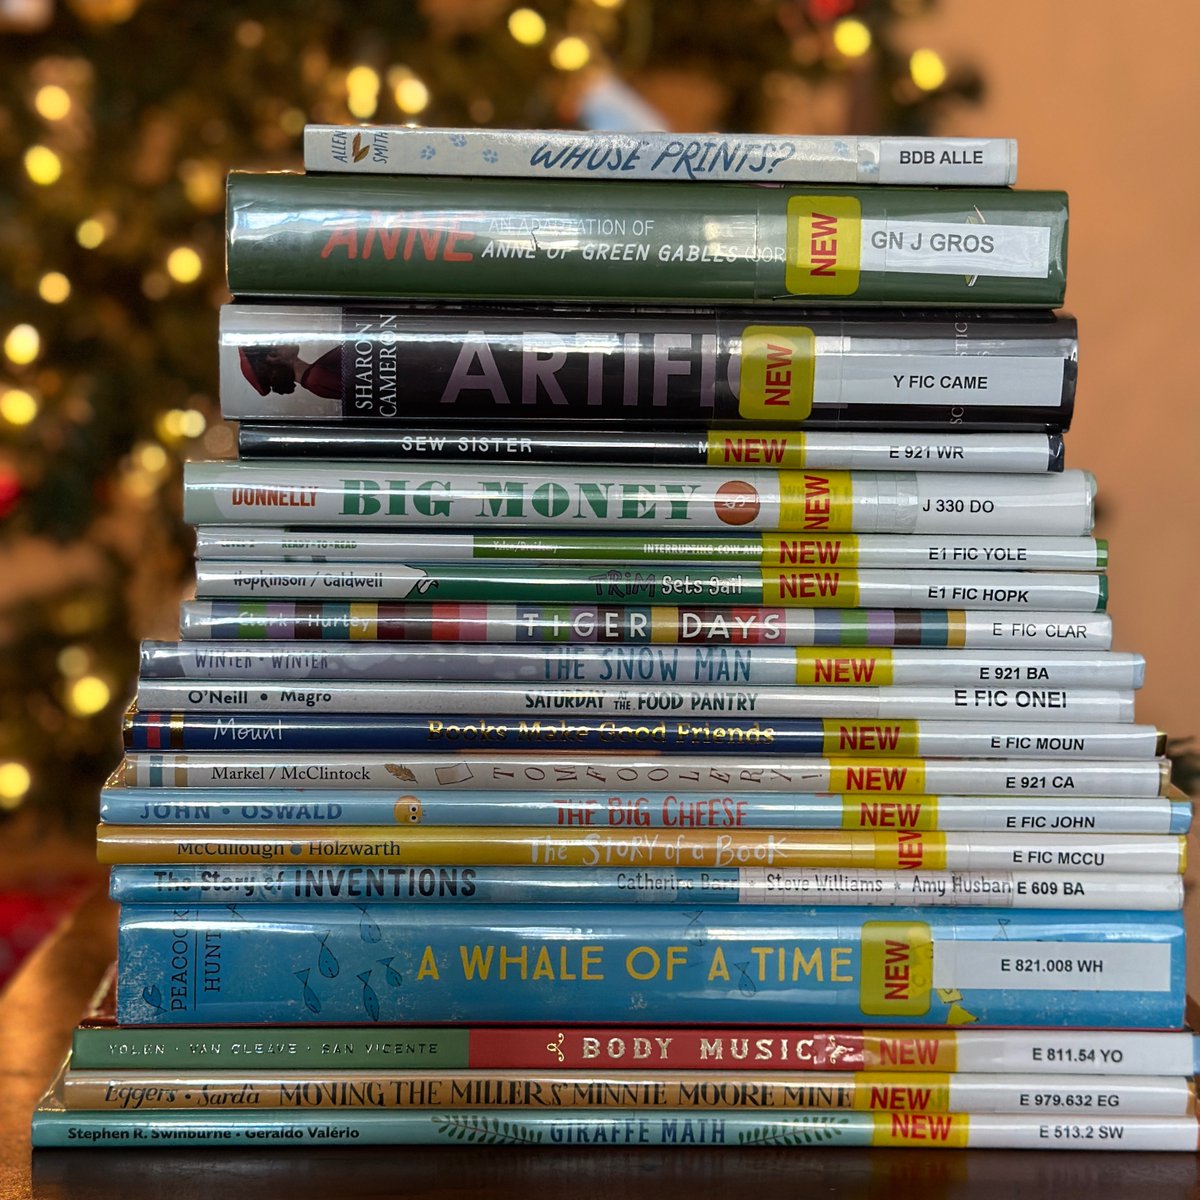 ✨We're staying local this holiday, so I checked out lots of library books! Here's my holiday #LibraryHaul. 📚 What are *you* reading? #AmReading #YA #MG #PB #ChildrensBooks